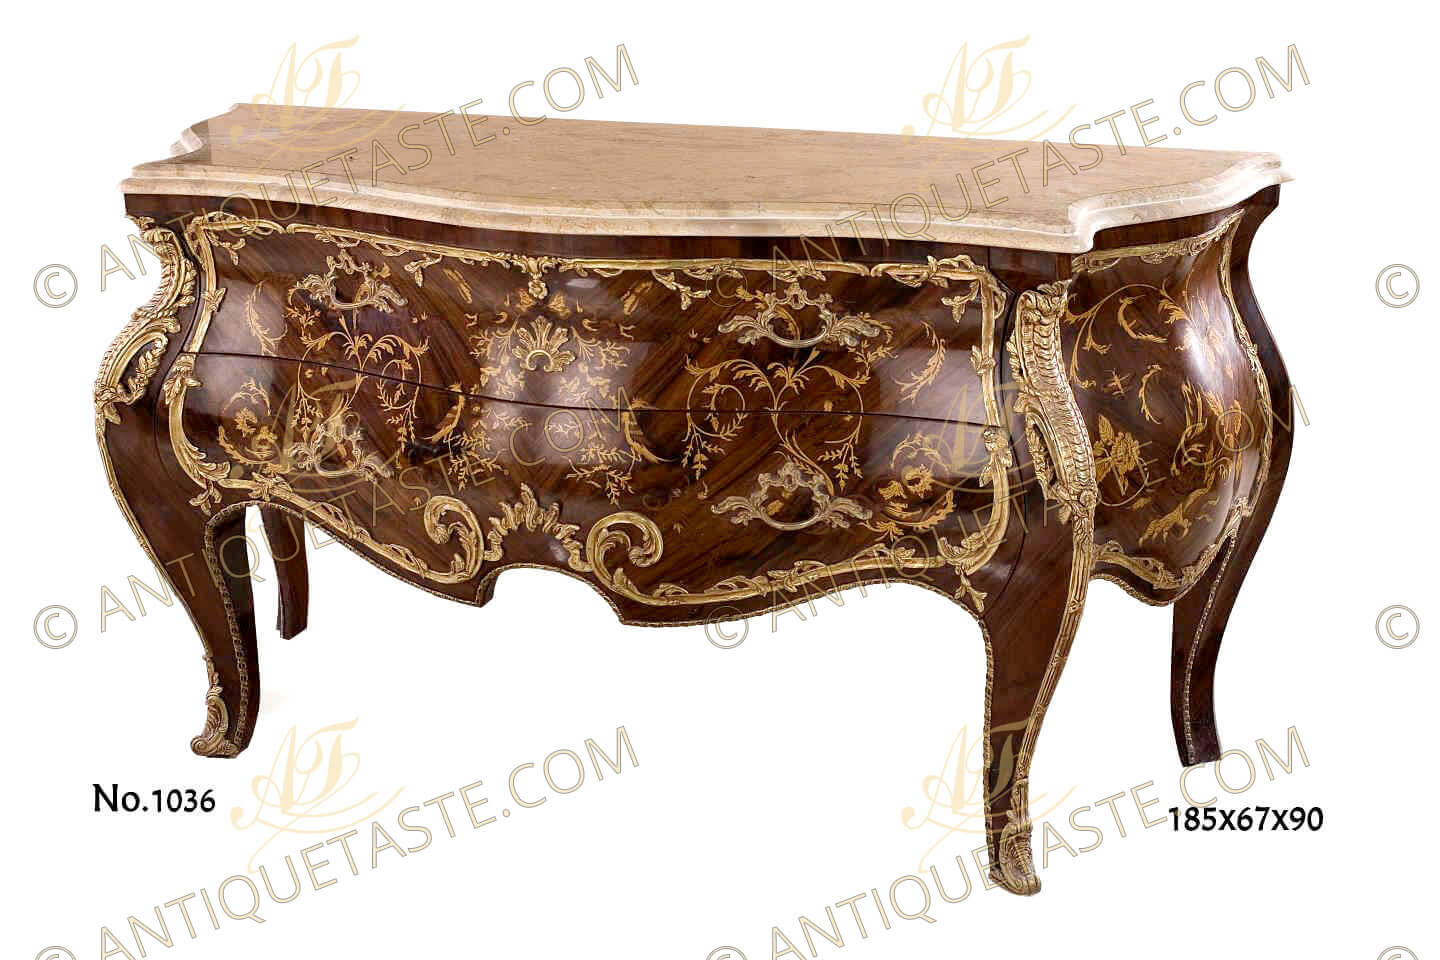 French Louis XV style bombé shaped ormolu-mounted marquetry Drawers Chest